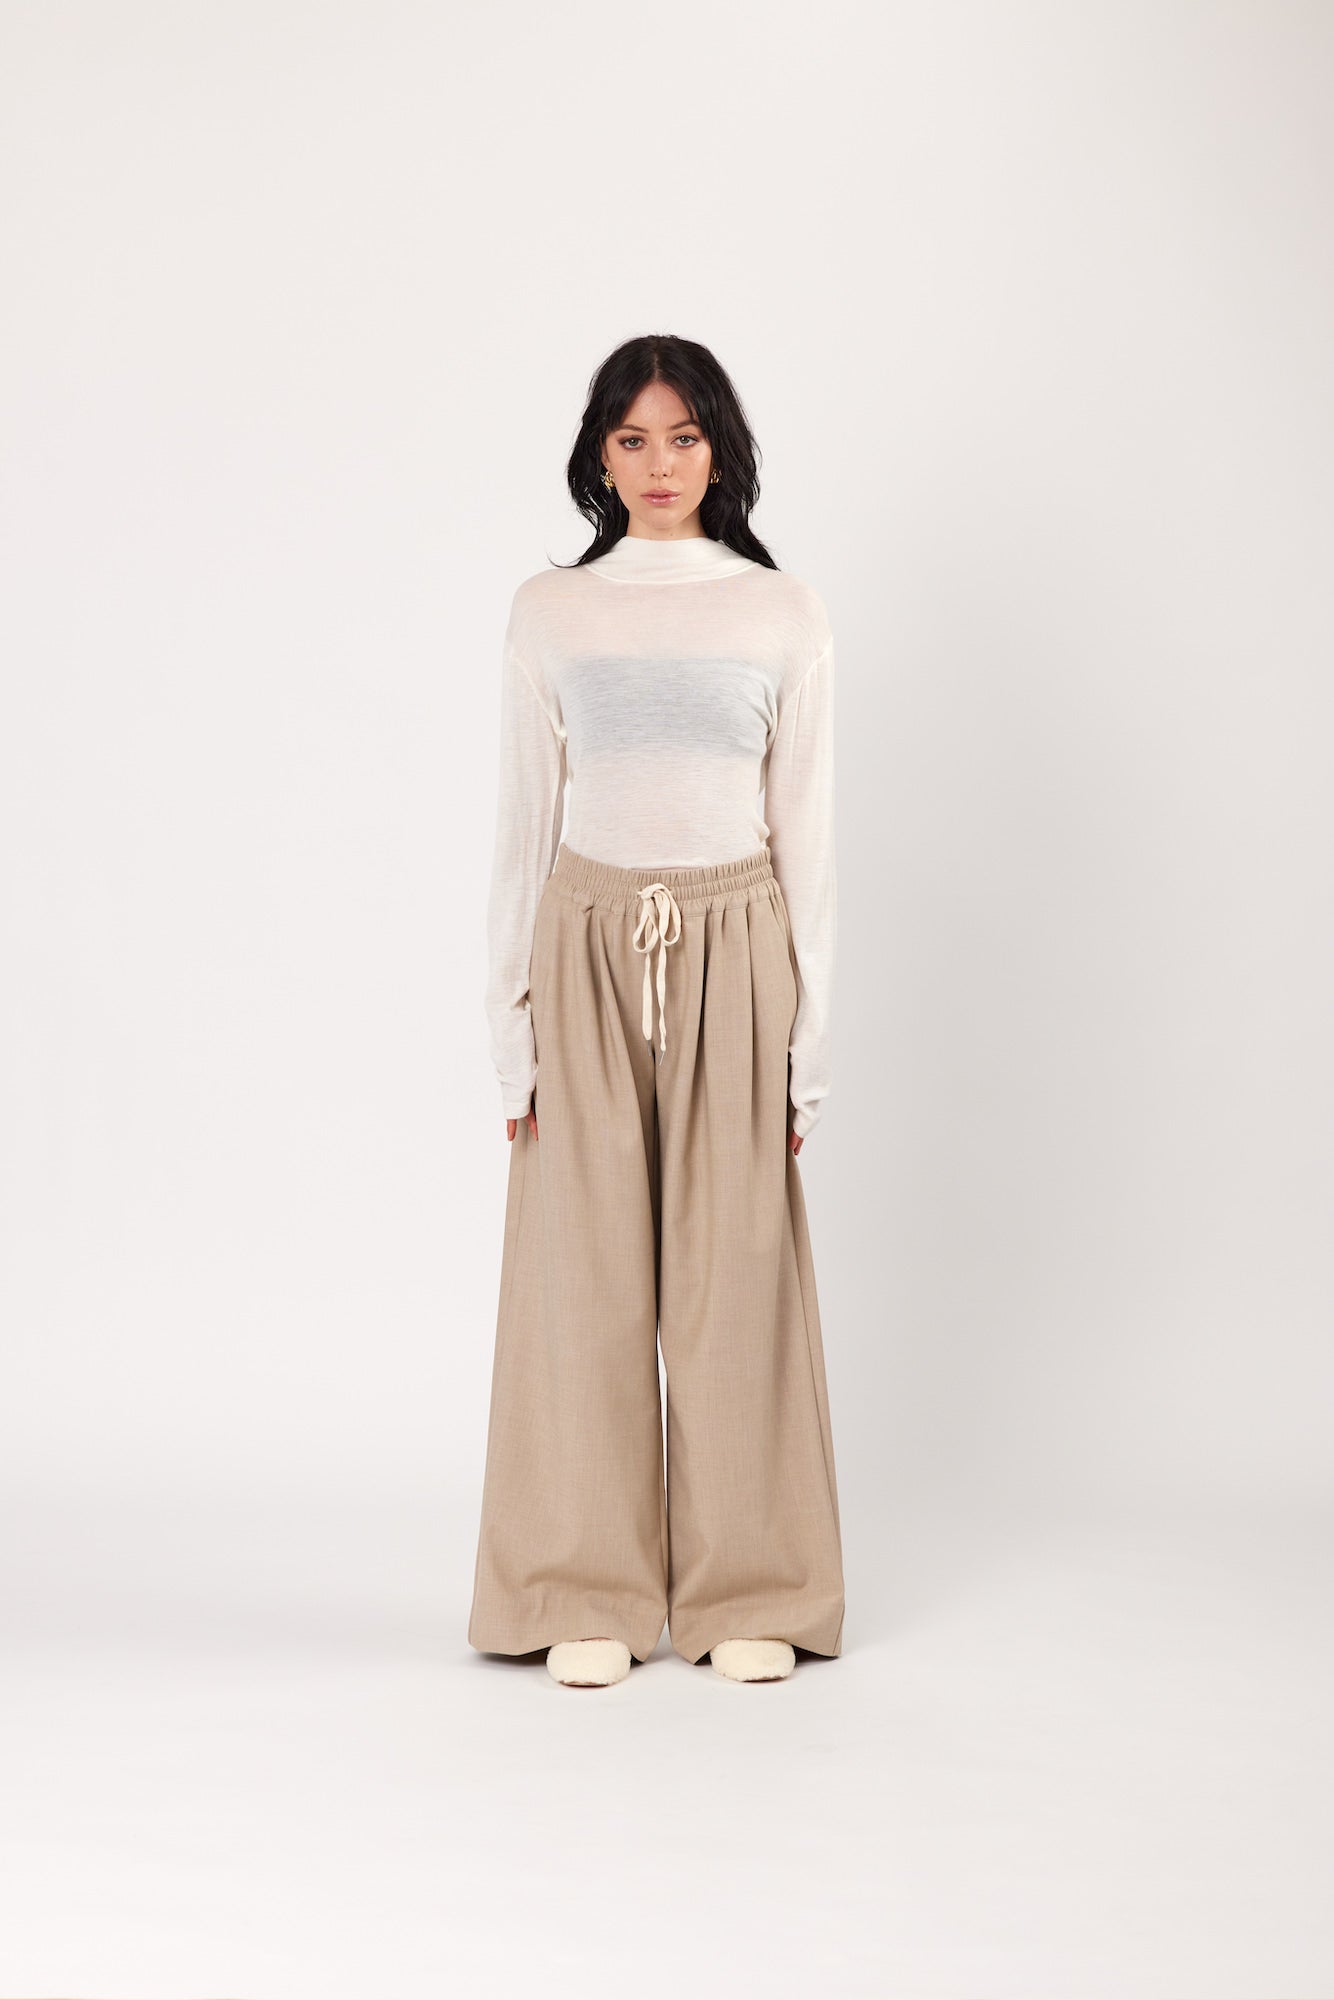 CLOVER TOP - IVORY